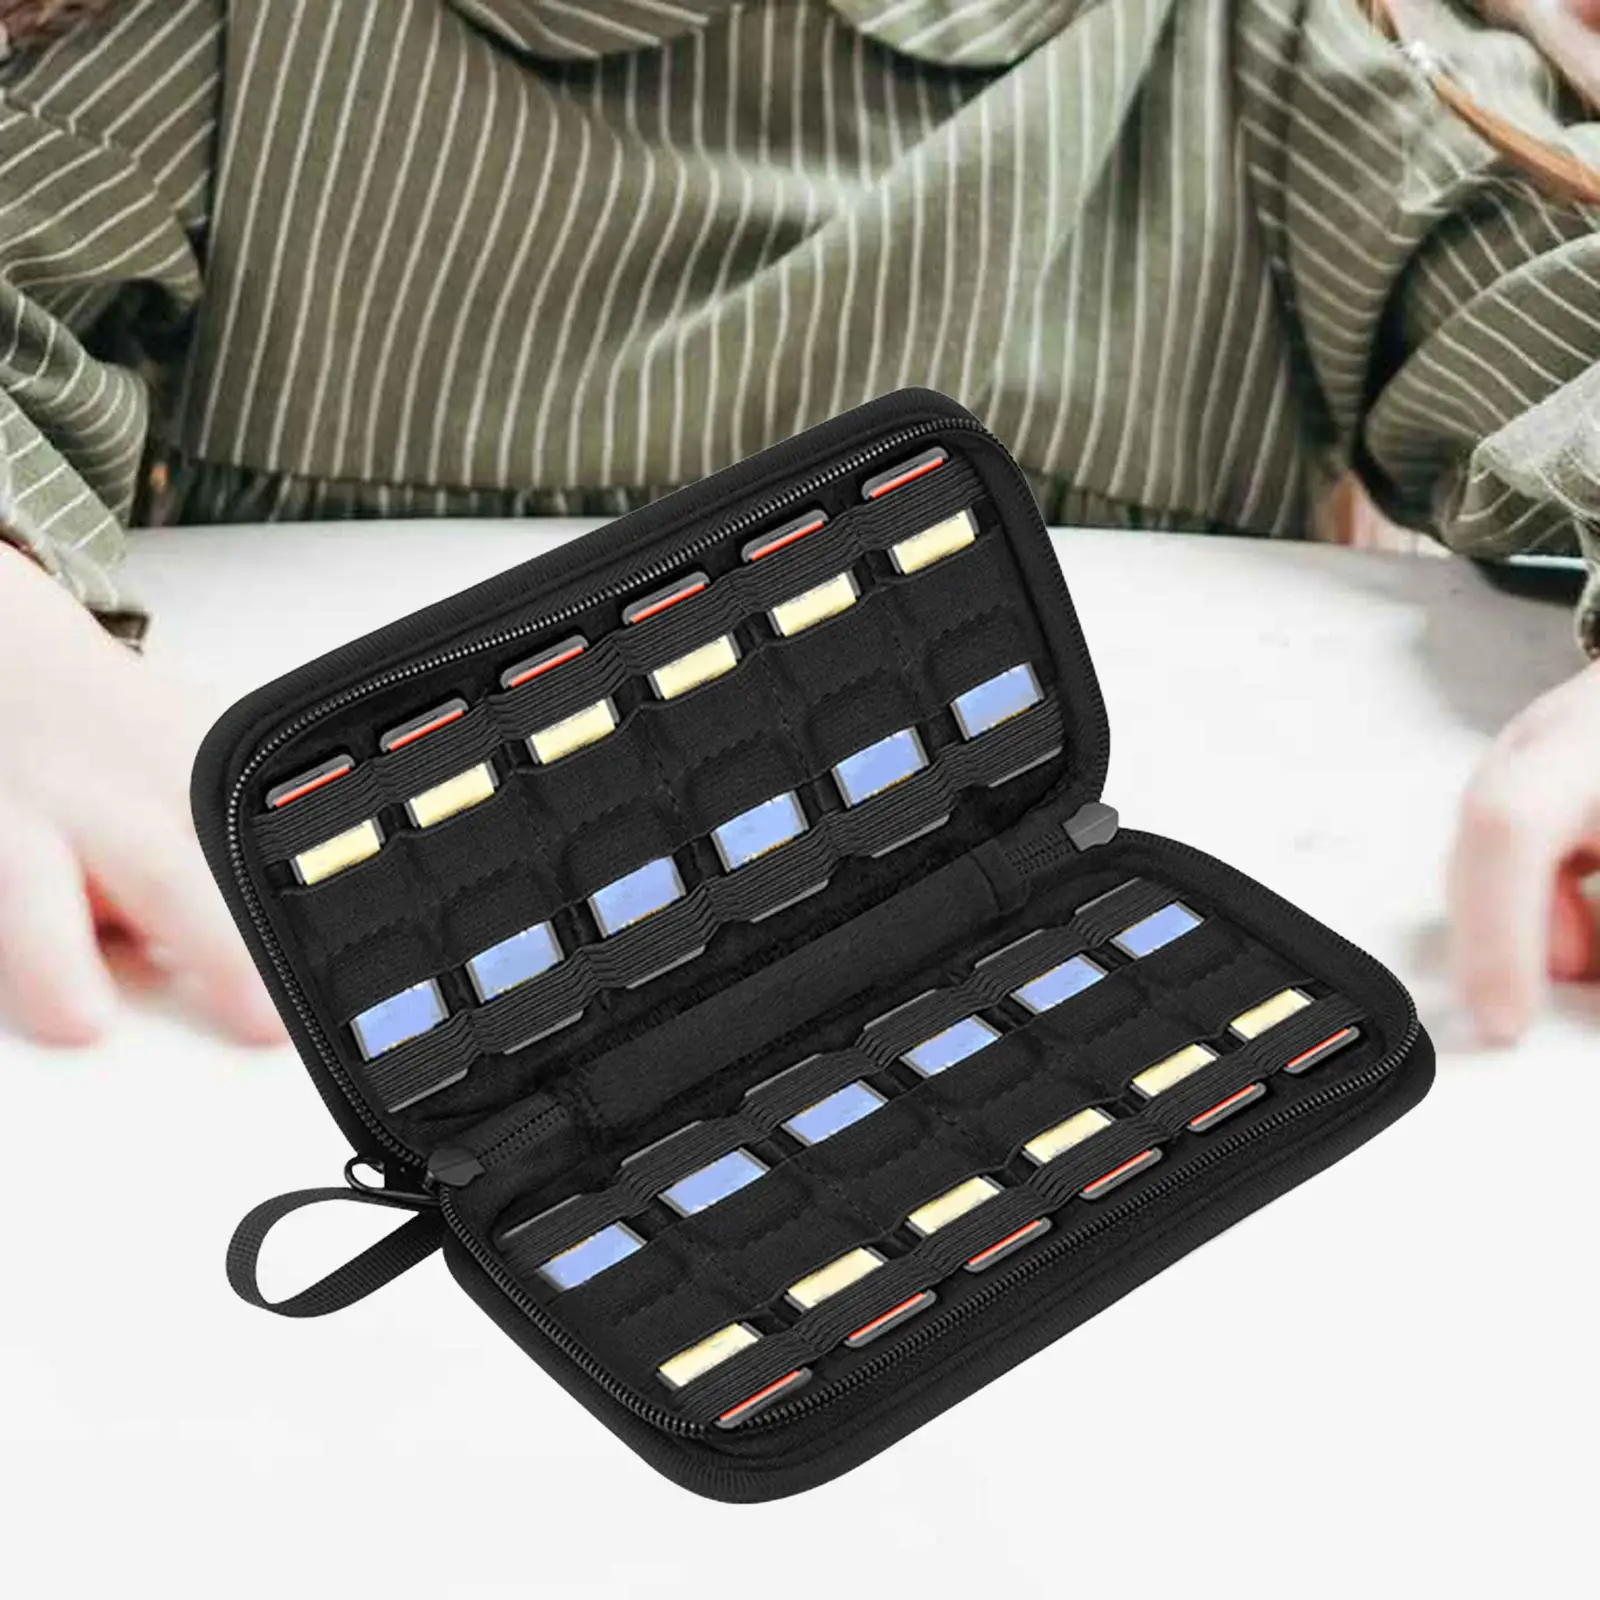 Game Card Carrying Case Wear Resistance Compact Portable Durable Game Card Travel Carry Case with 24 Games Slots Card Pouch Case